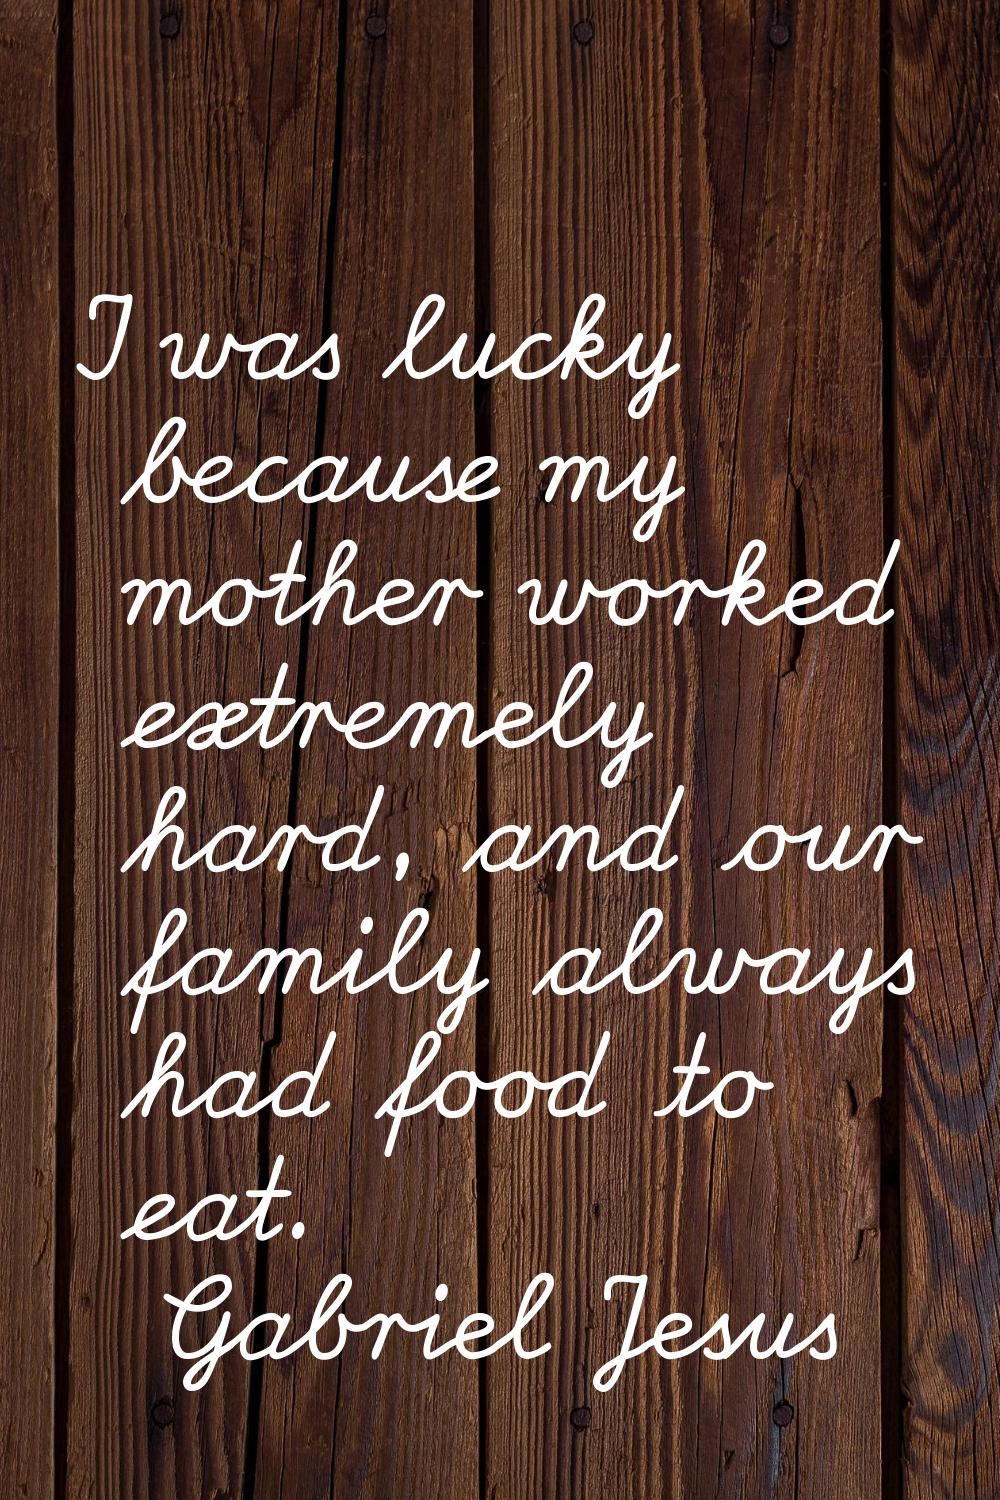 I was lucky because my mother worked extremely hard, and our family always had food to eat.